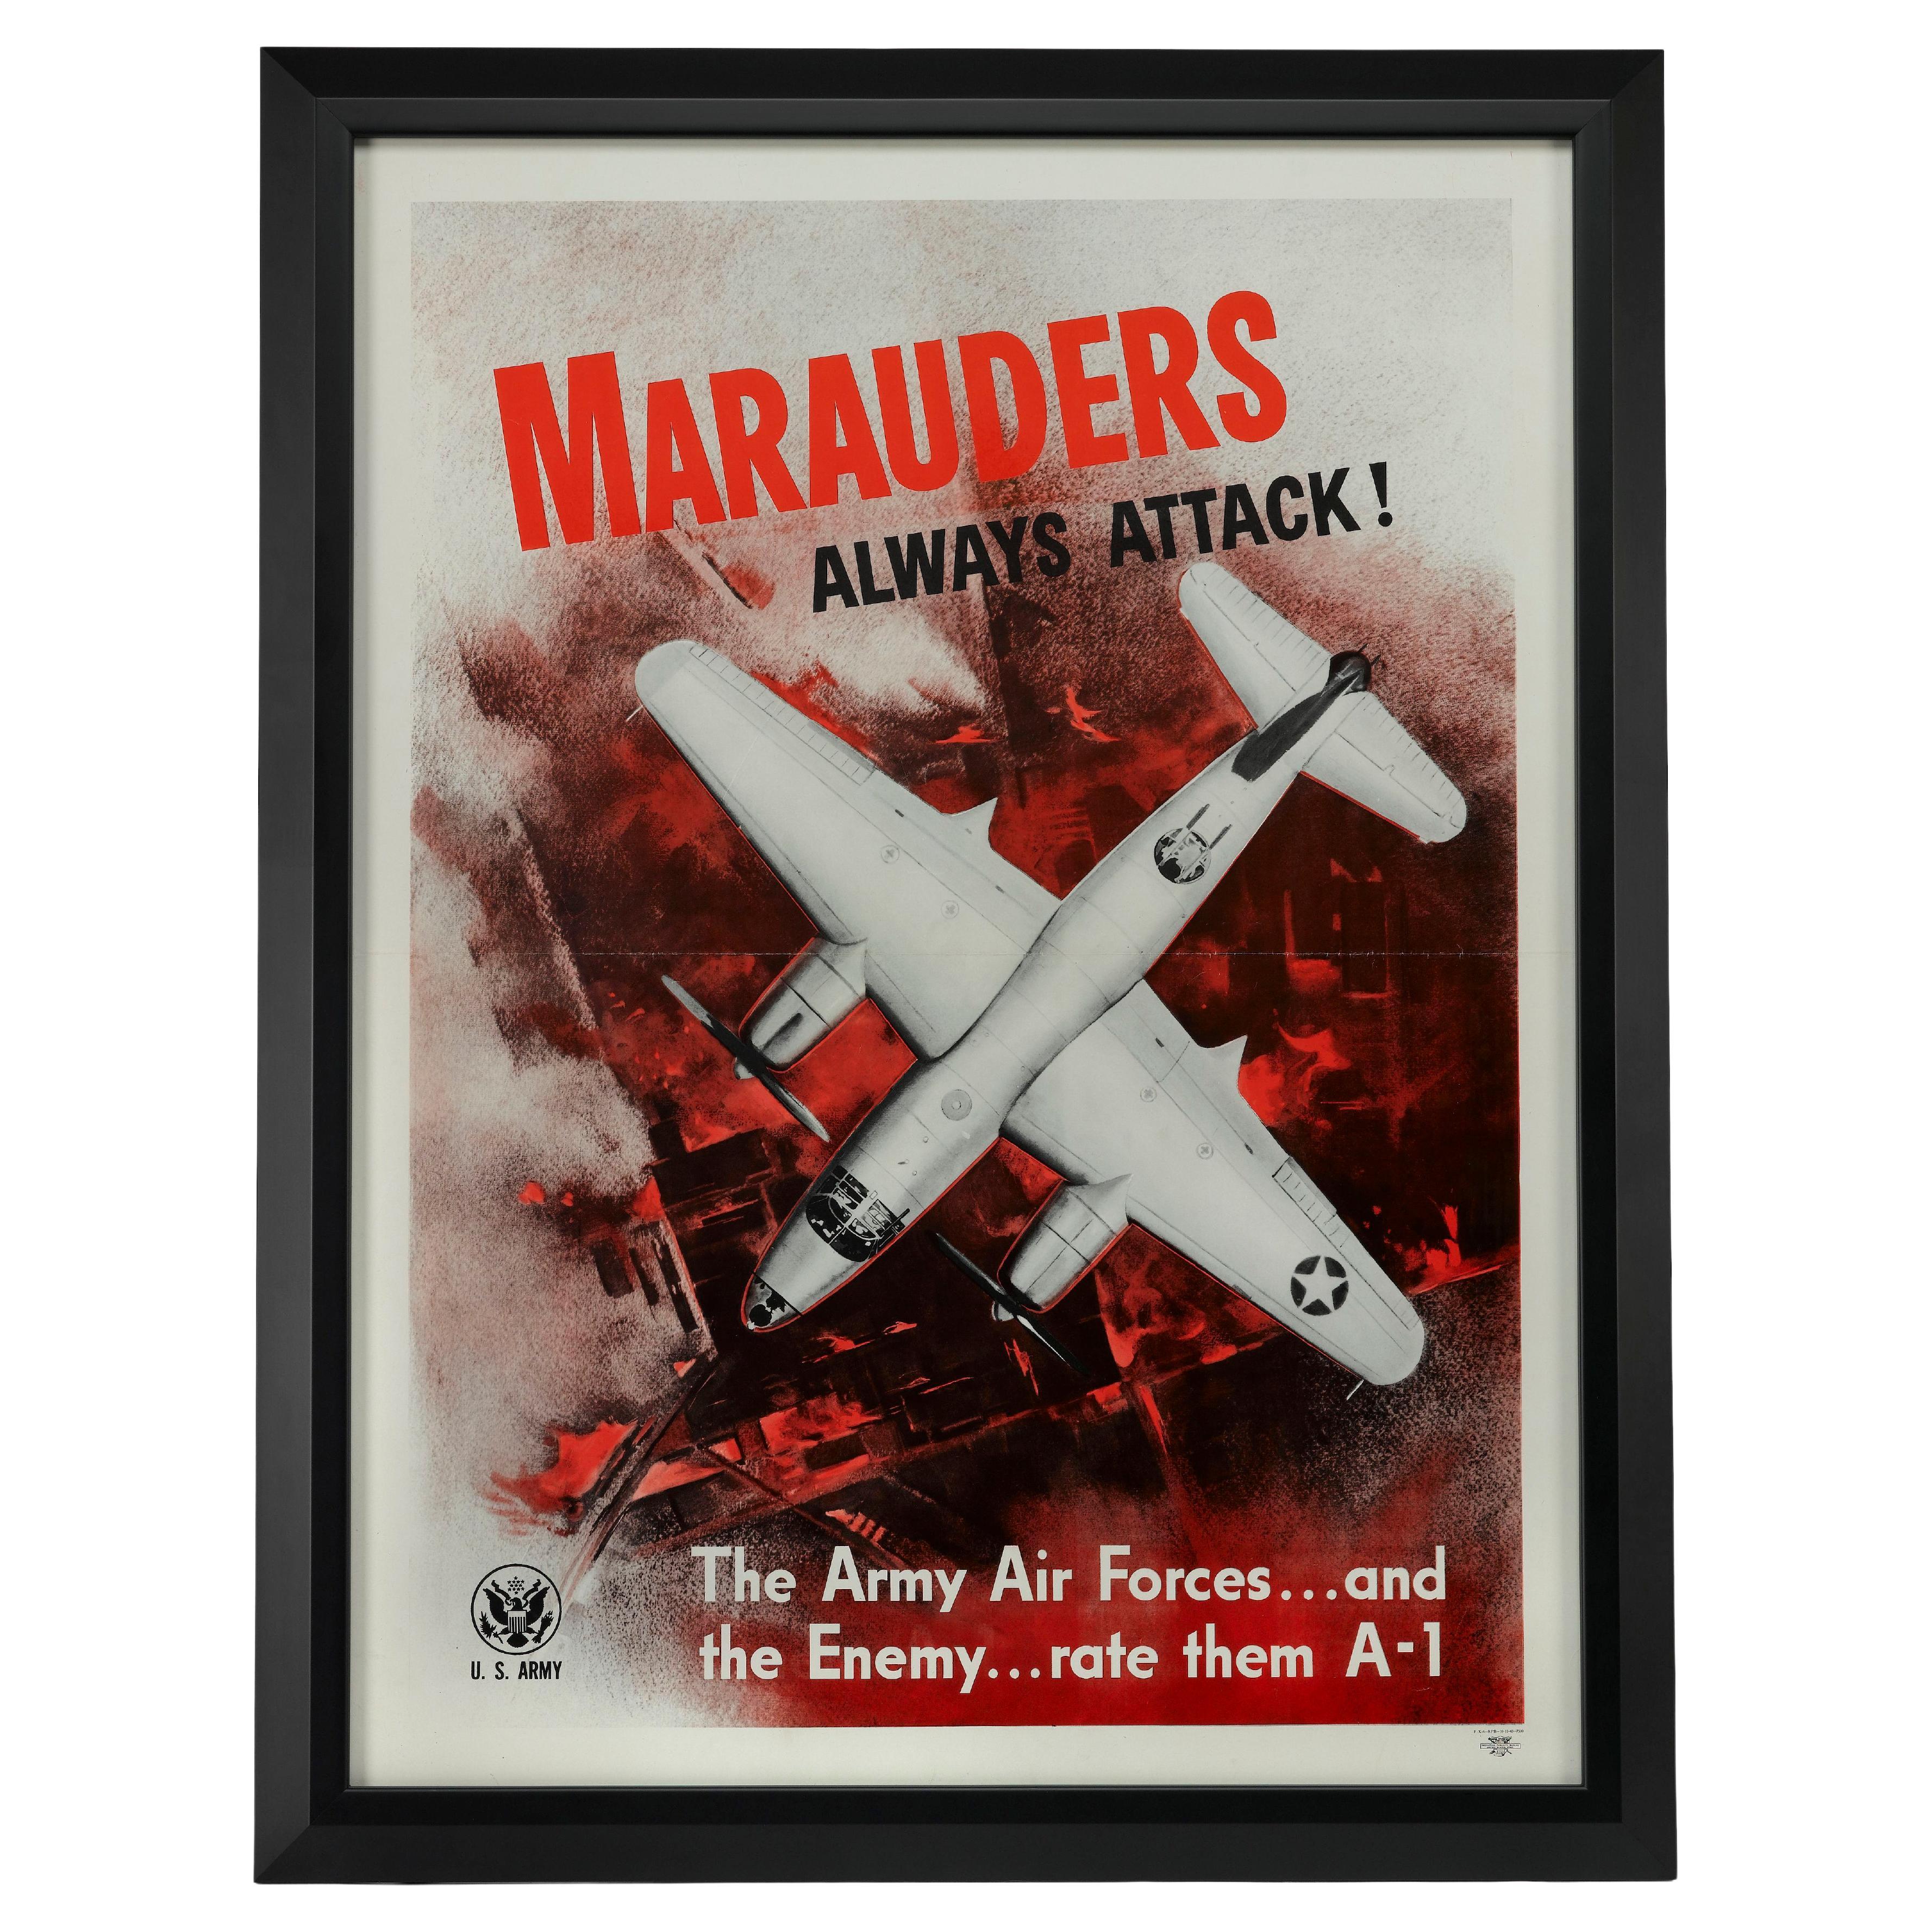 "Marauders Always Attack!" Vintage Wwii Army Air Forces Poster, 1943 For Sale